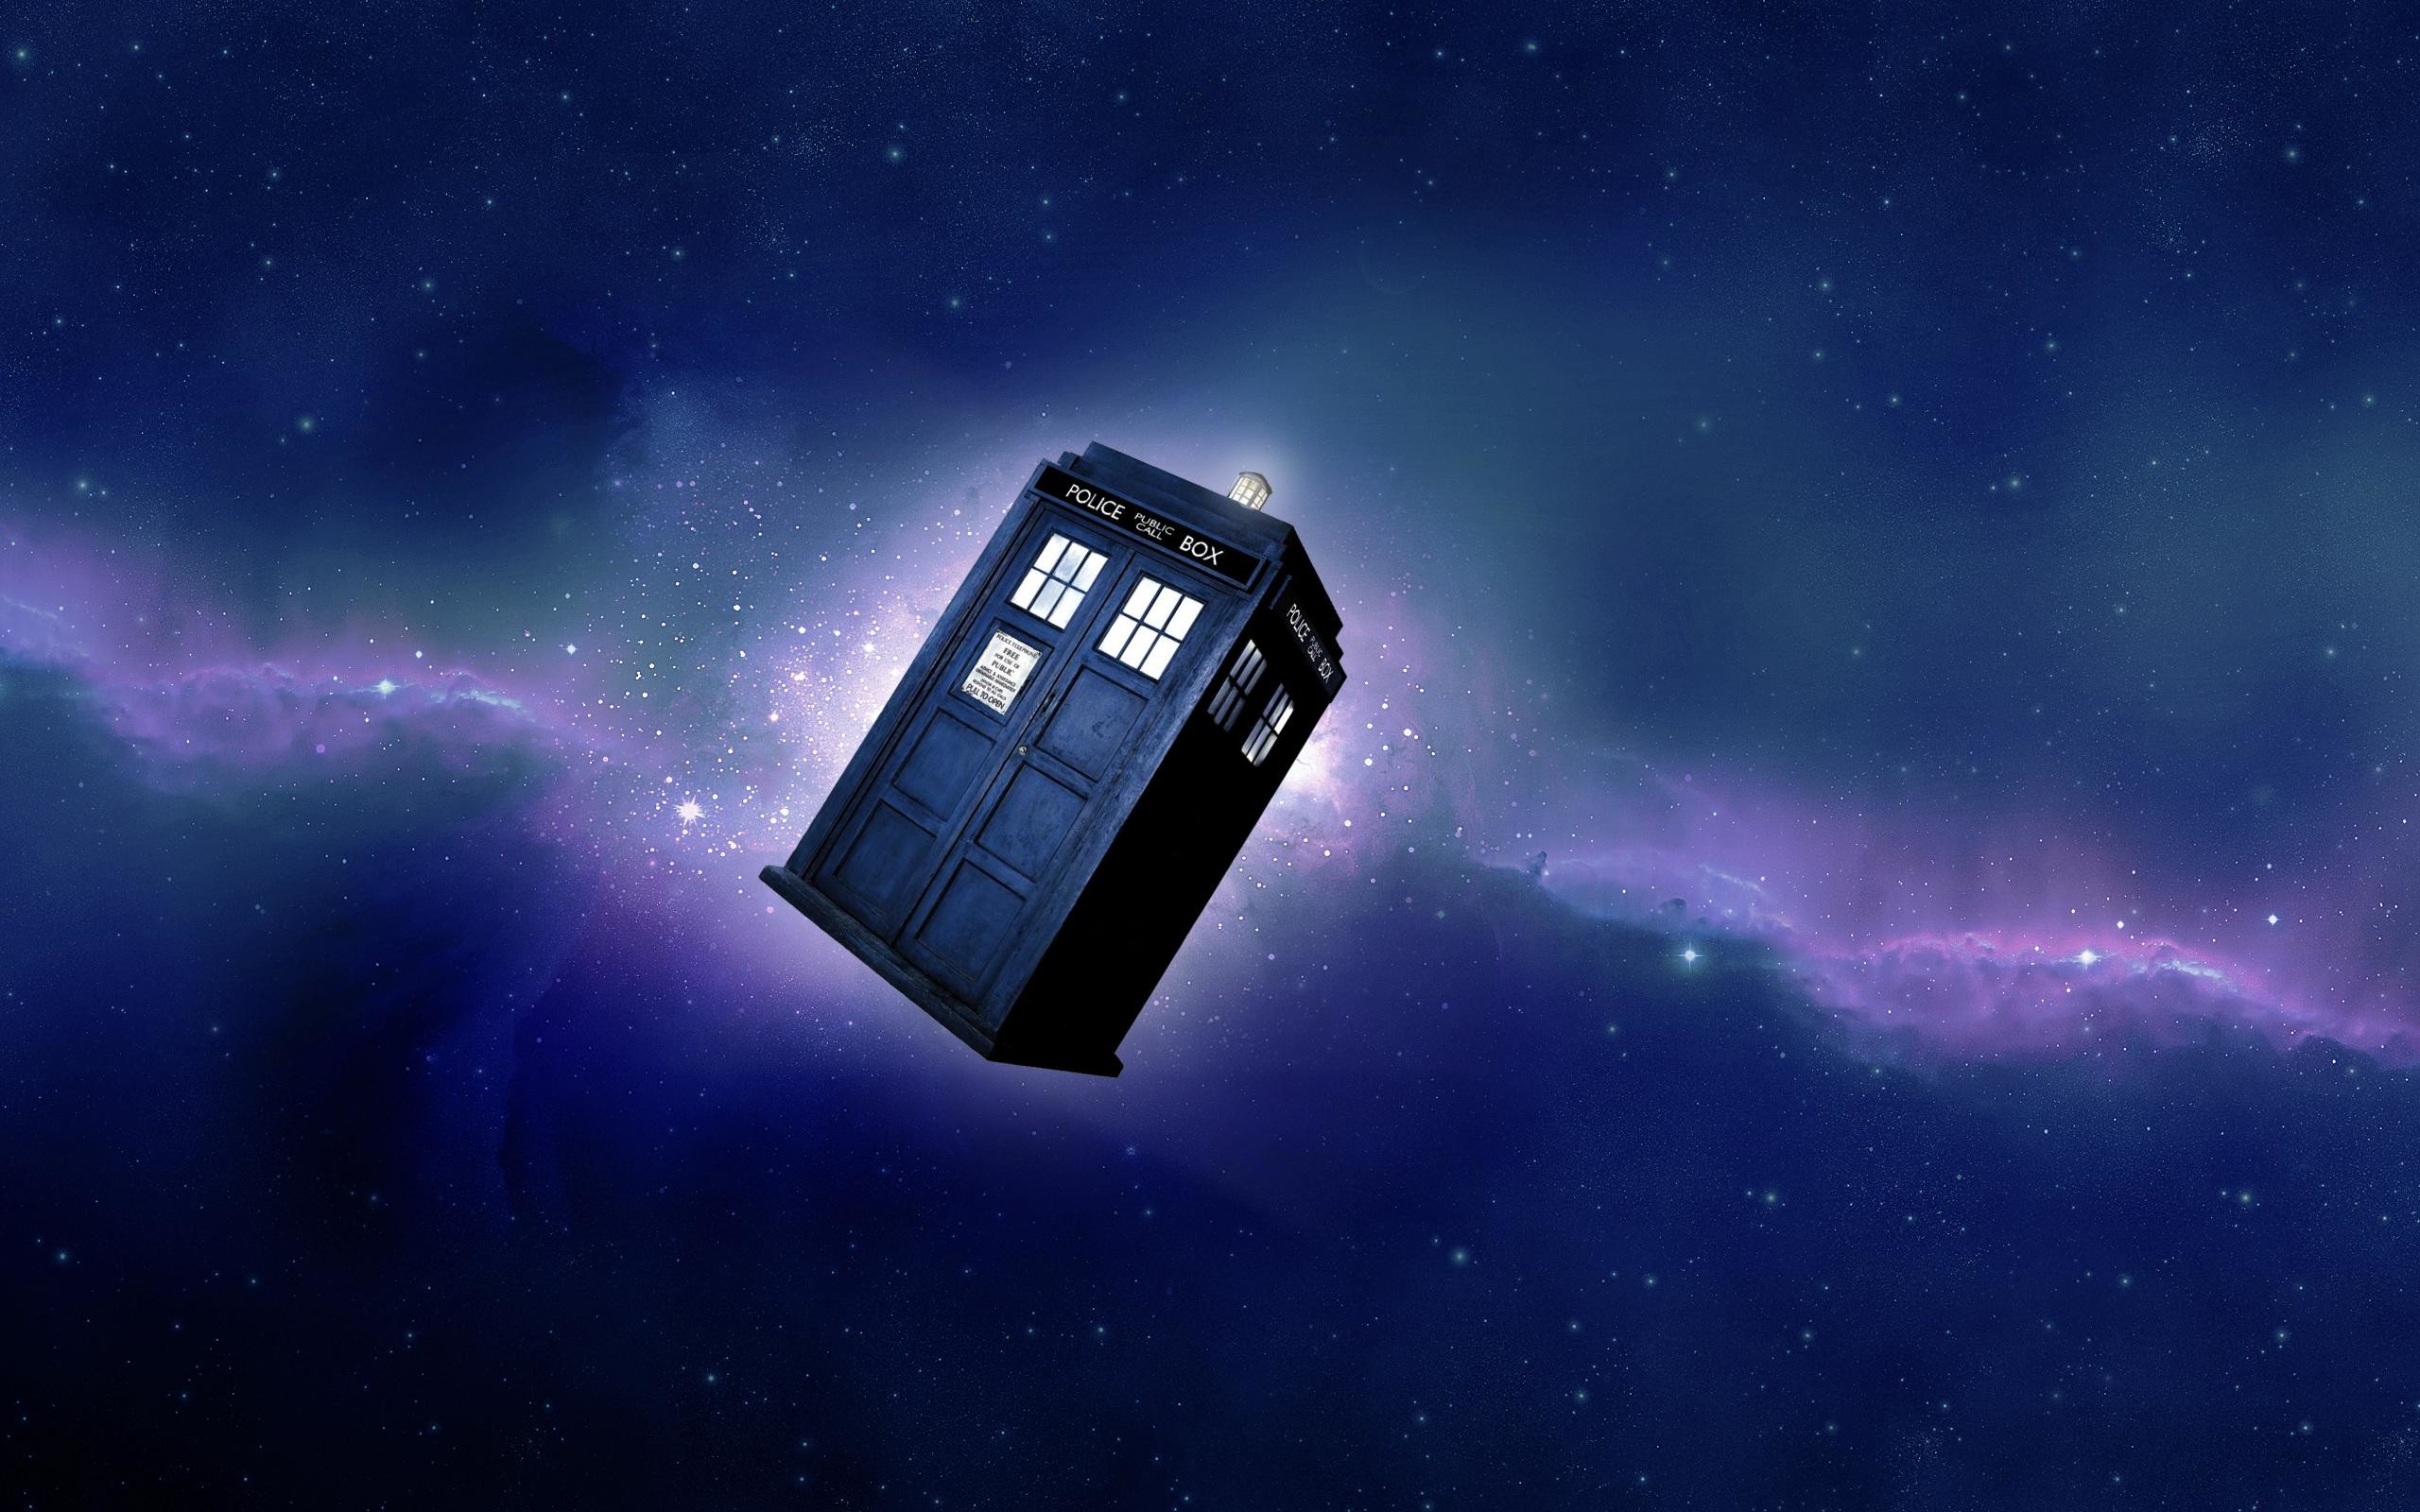 best ideas about Doctor who wallpaper on Pinterest Tardis